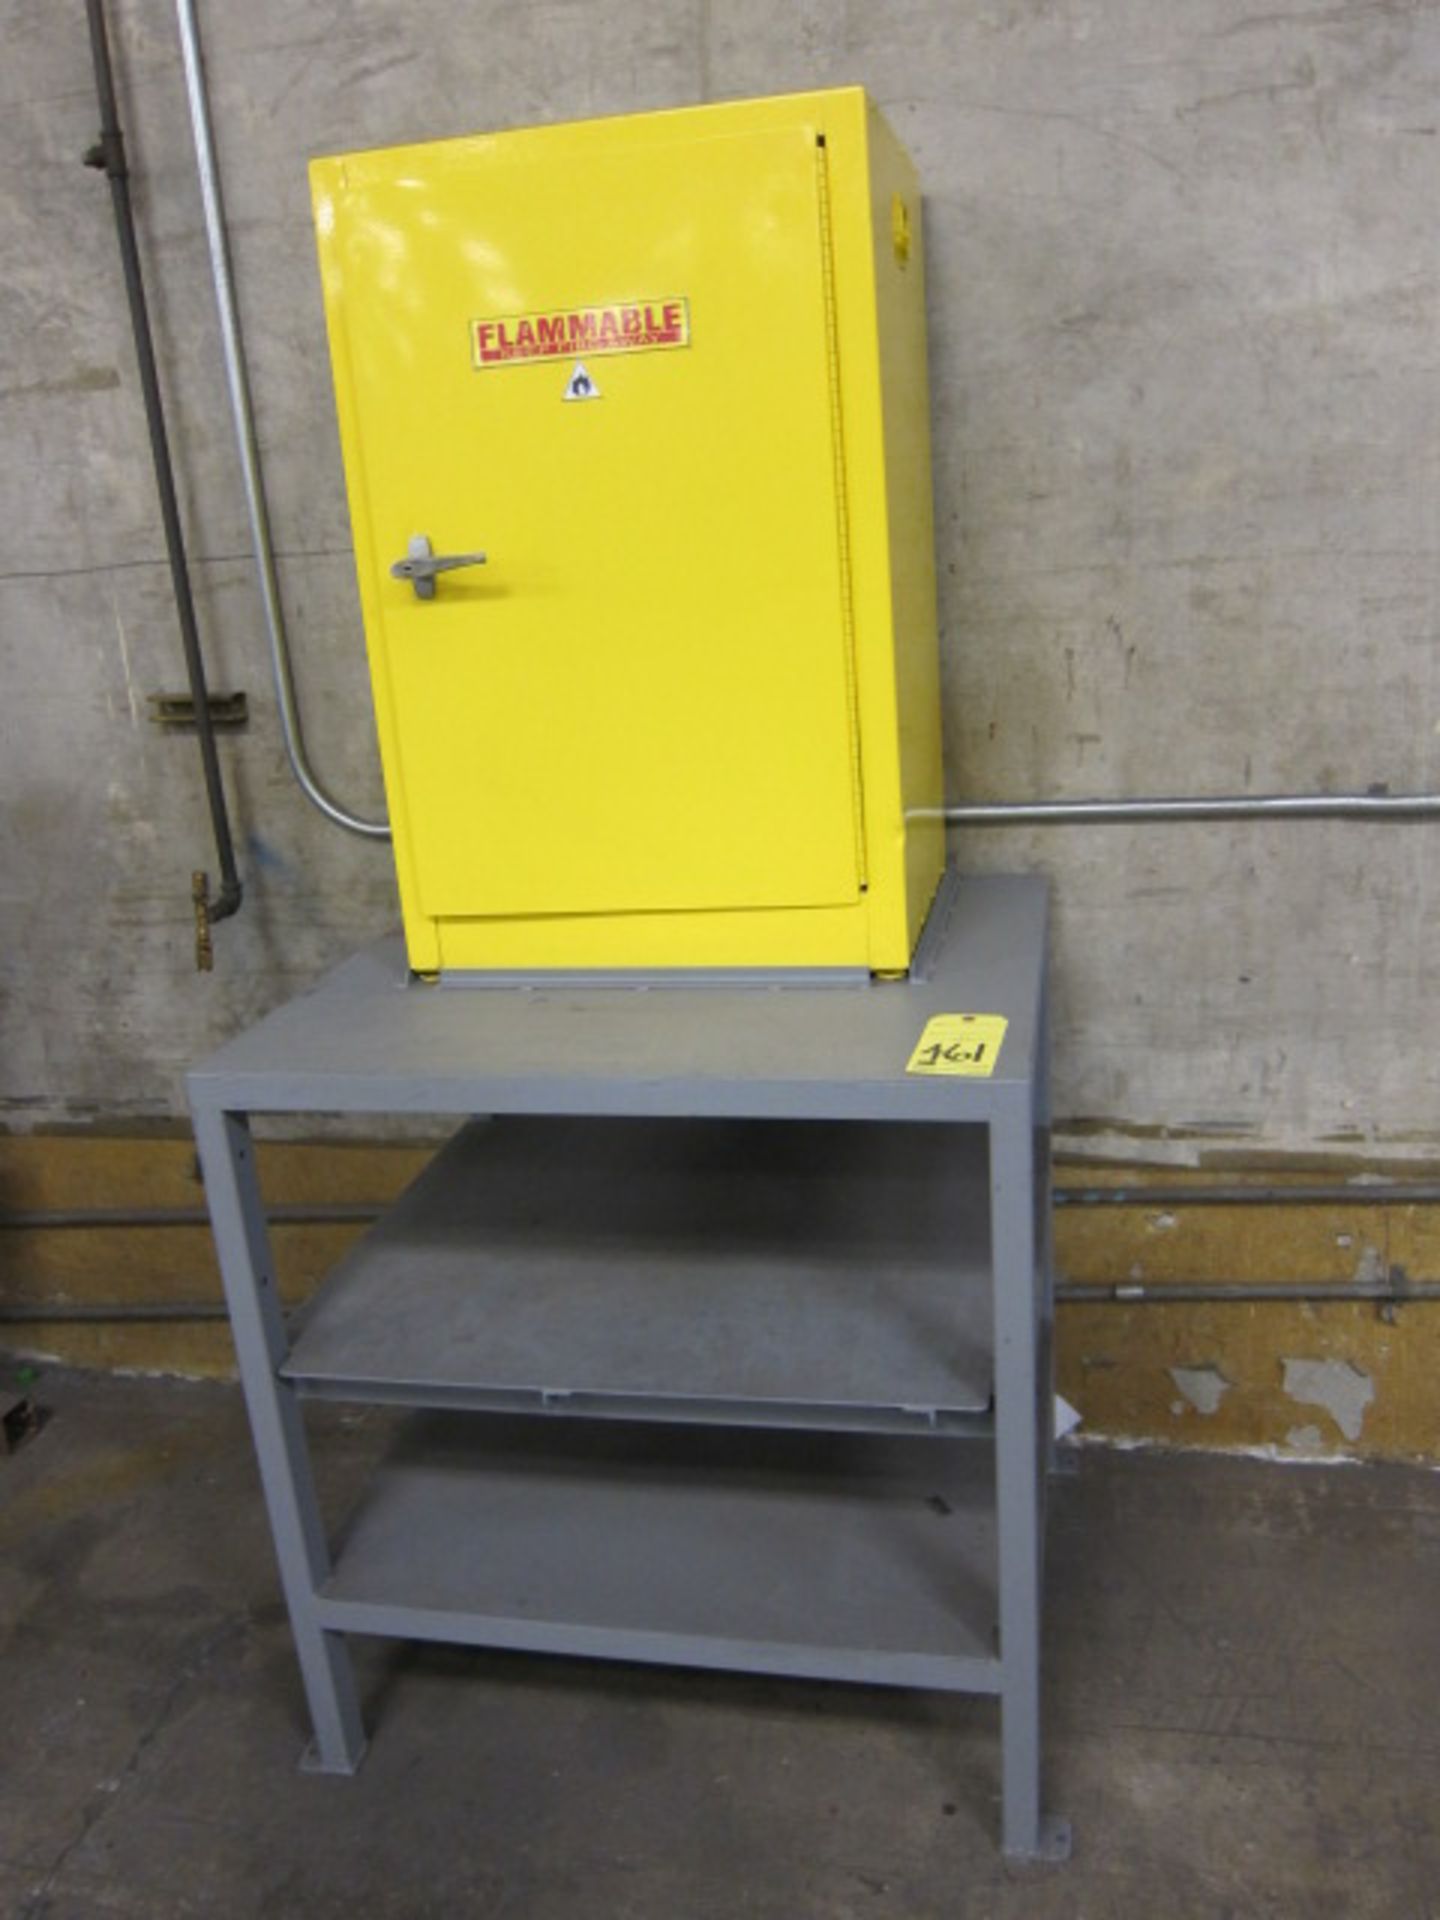 FLAMMABLE CABINET, w/contents, on steel work stand